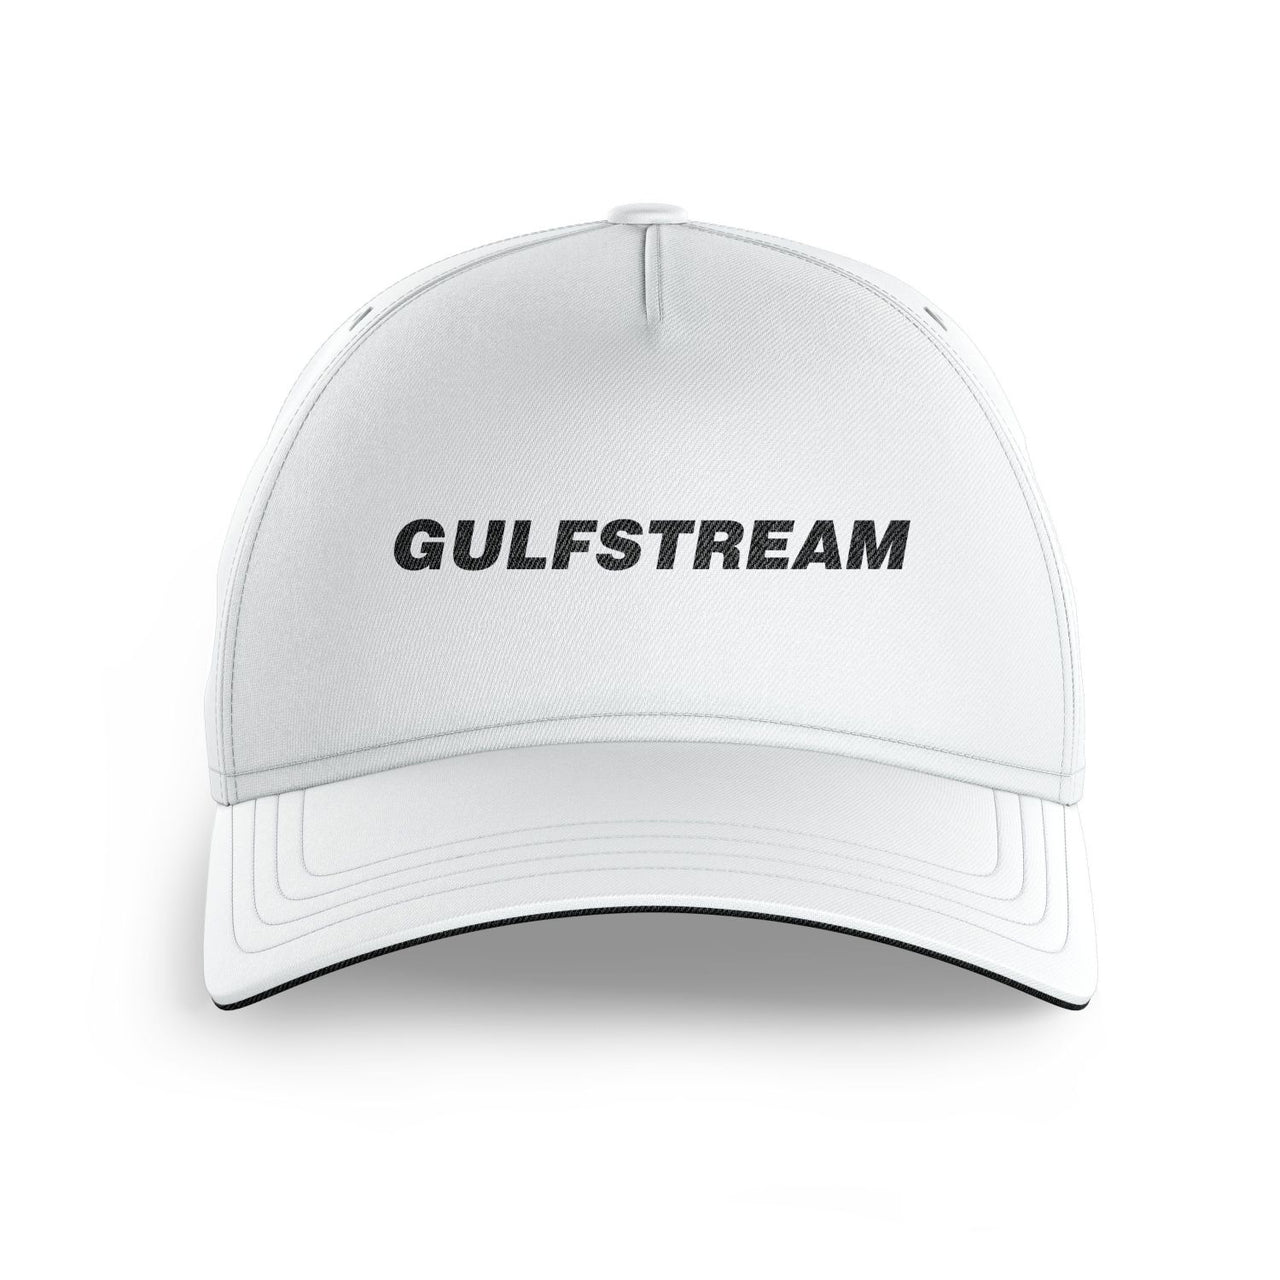 Gulfstream & Text Printed Hats